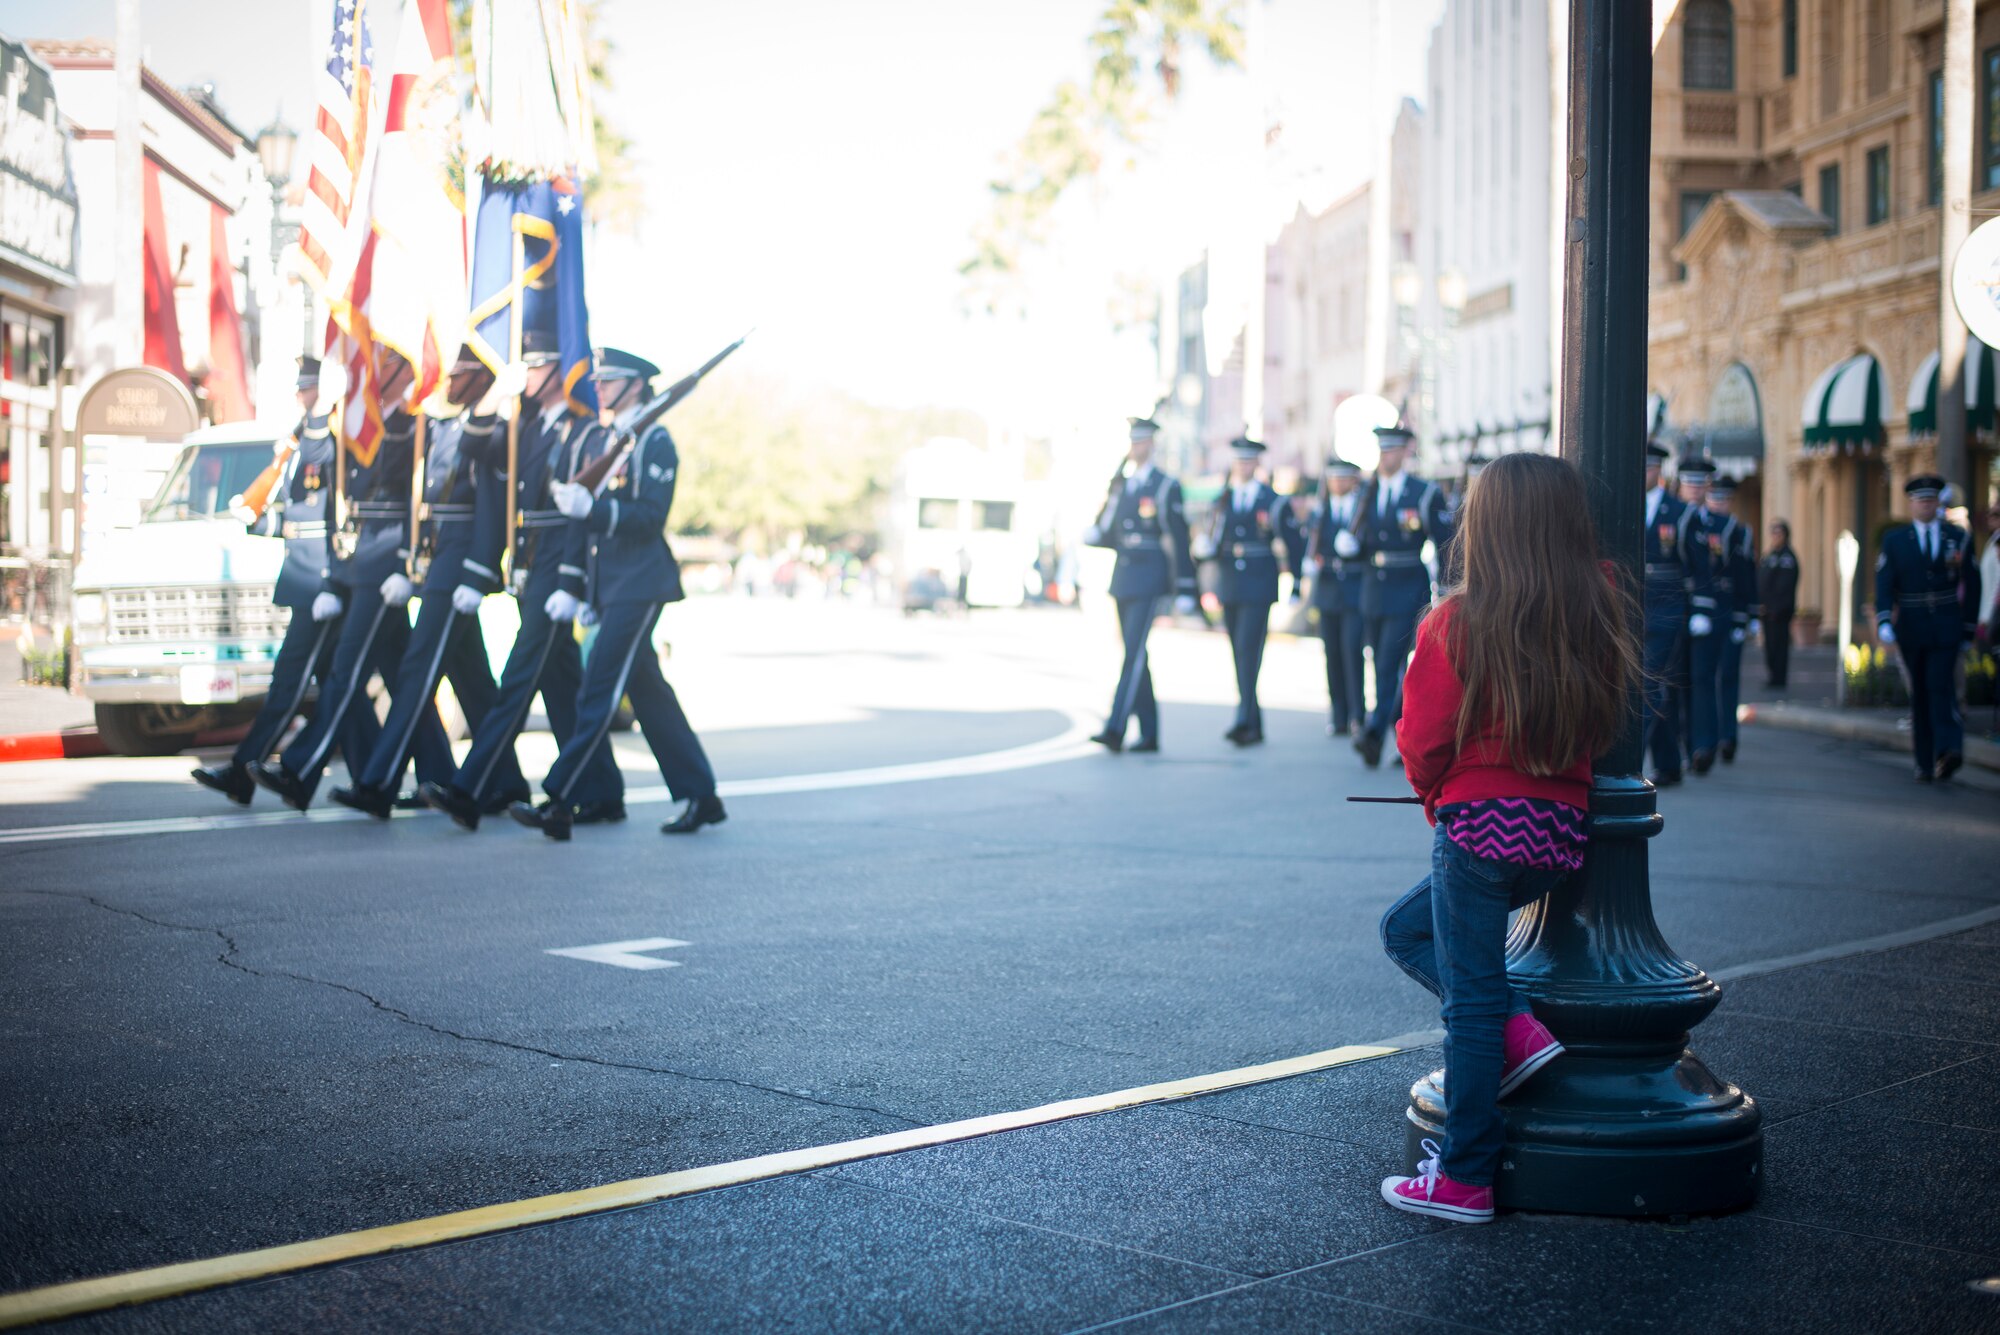 A young child looks on as members of the United States Air Force Honor Guard march during a performance at Universal Studios in Orlando, Fla. Jan. 20, 2016. After marching through the park, the Honor Guard finished with a performance by the drill team. (U.S. Air Force photo by Staff Sgt. Chad C. Strohmeyer/Released)